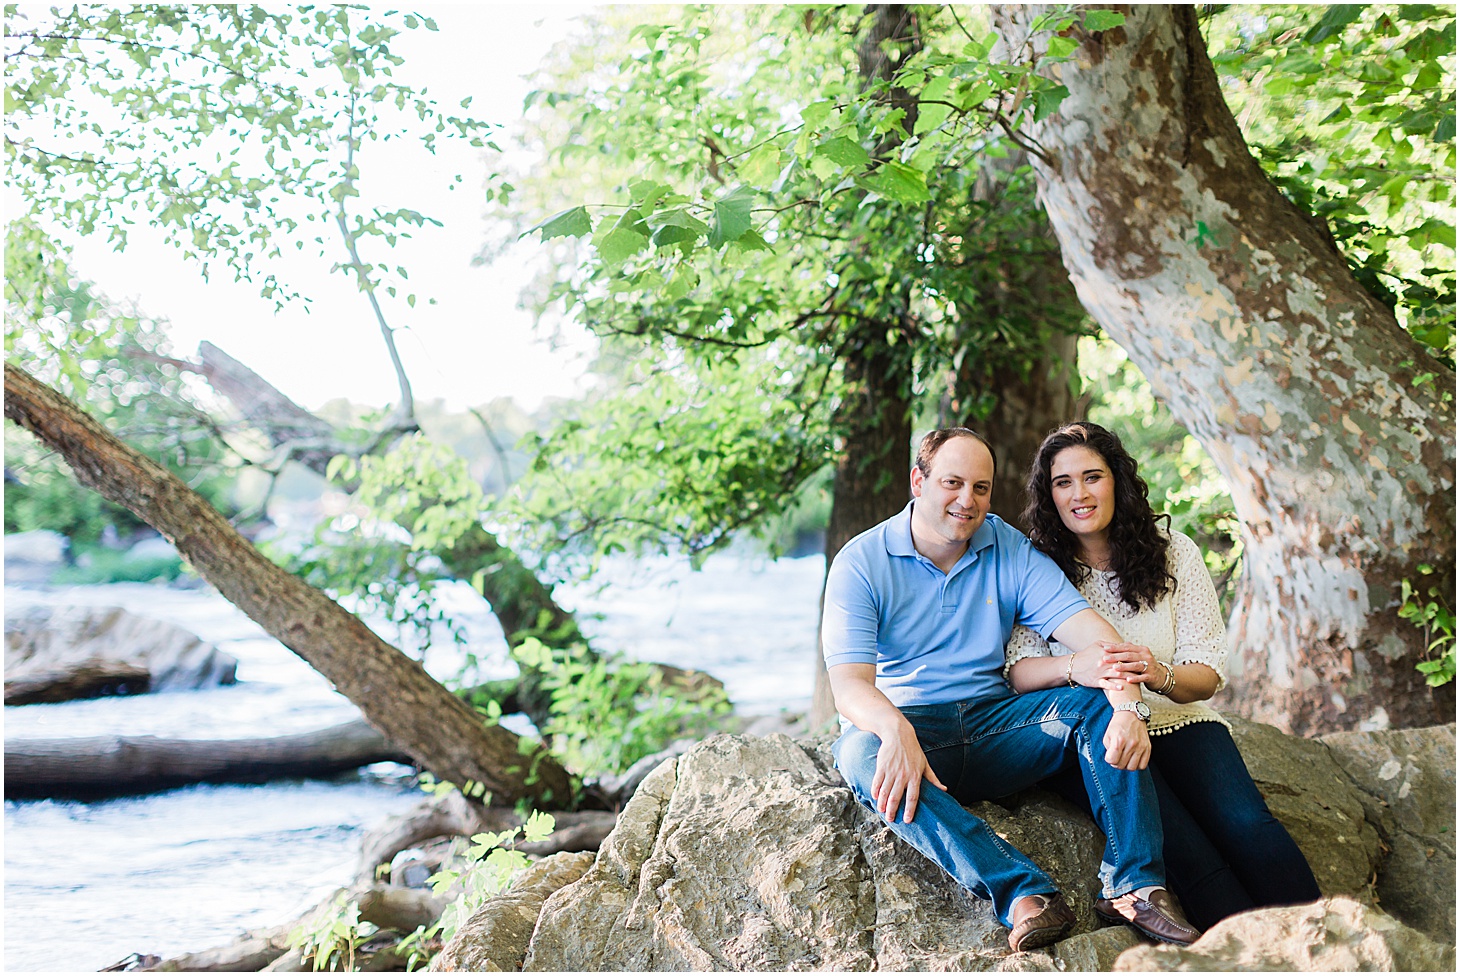 Engagement Session in Potomac, MD, Great Falls Tavern Engagement Session, Sarah Bradshaw Photography, DC Wedding Photographer